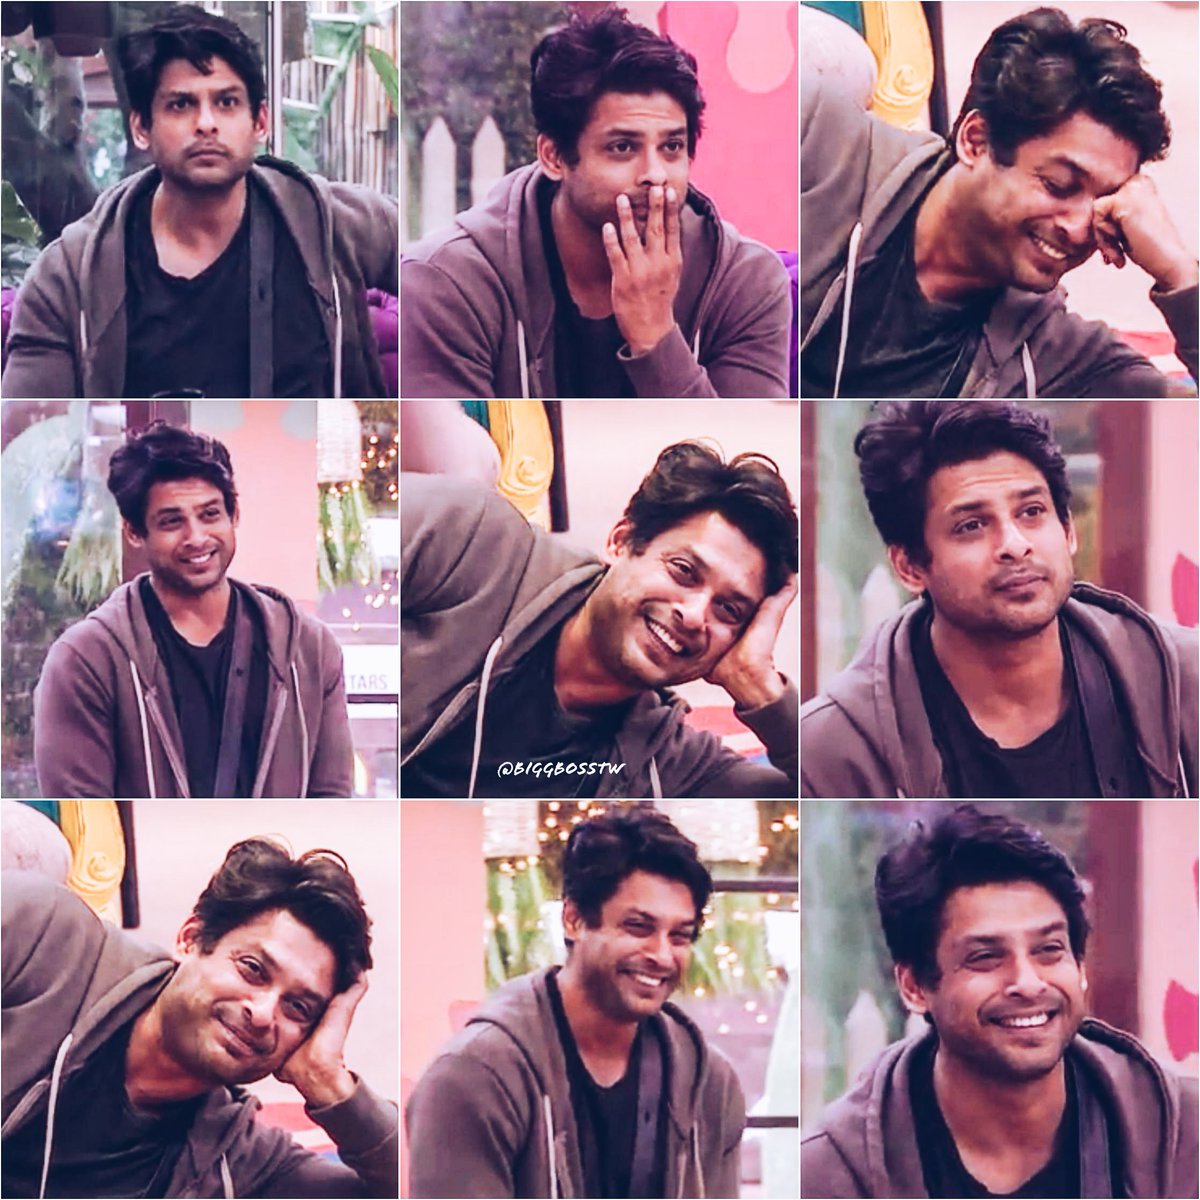 Weekend episode was about to start & Sid was too lazy to get ready. Suddenly Salman came on screen & the look on his face was awwdorable!  He did the entire sequence with hoodie & shorts & tried to hide his legs with a pillow. Cudie  @sidharth_shukla!  #SidharthShukla